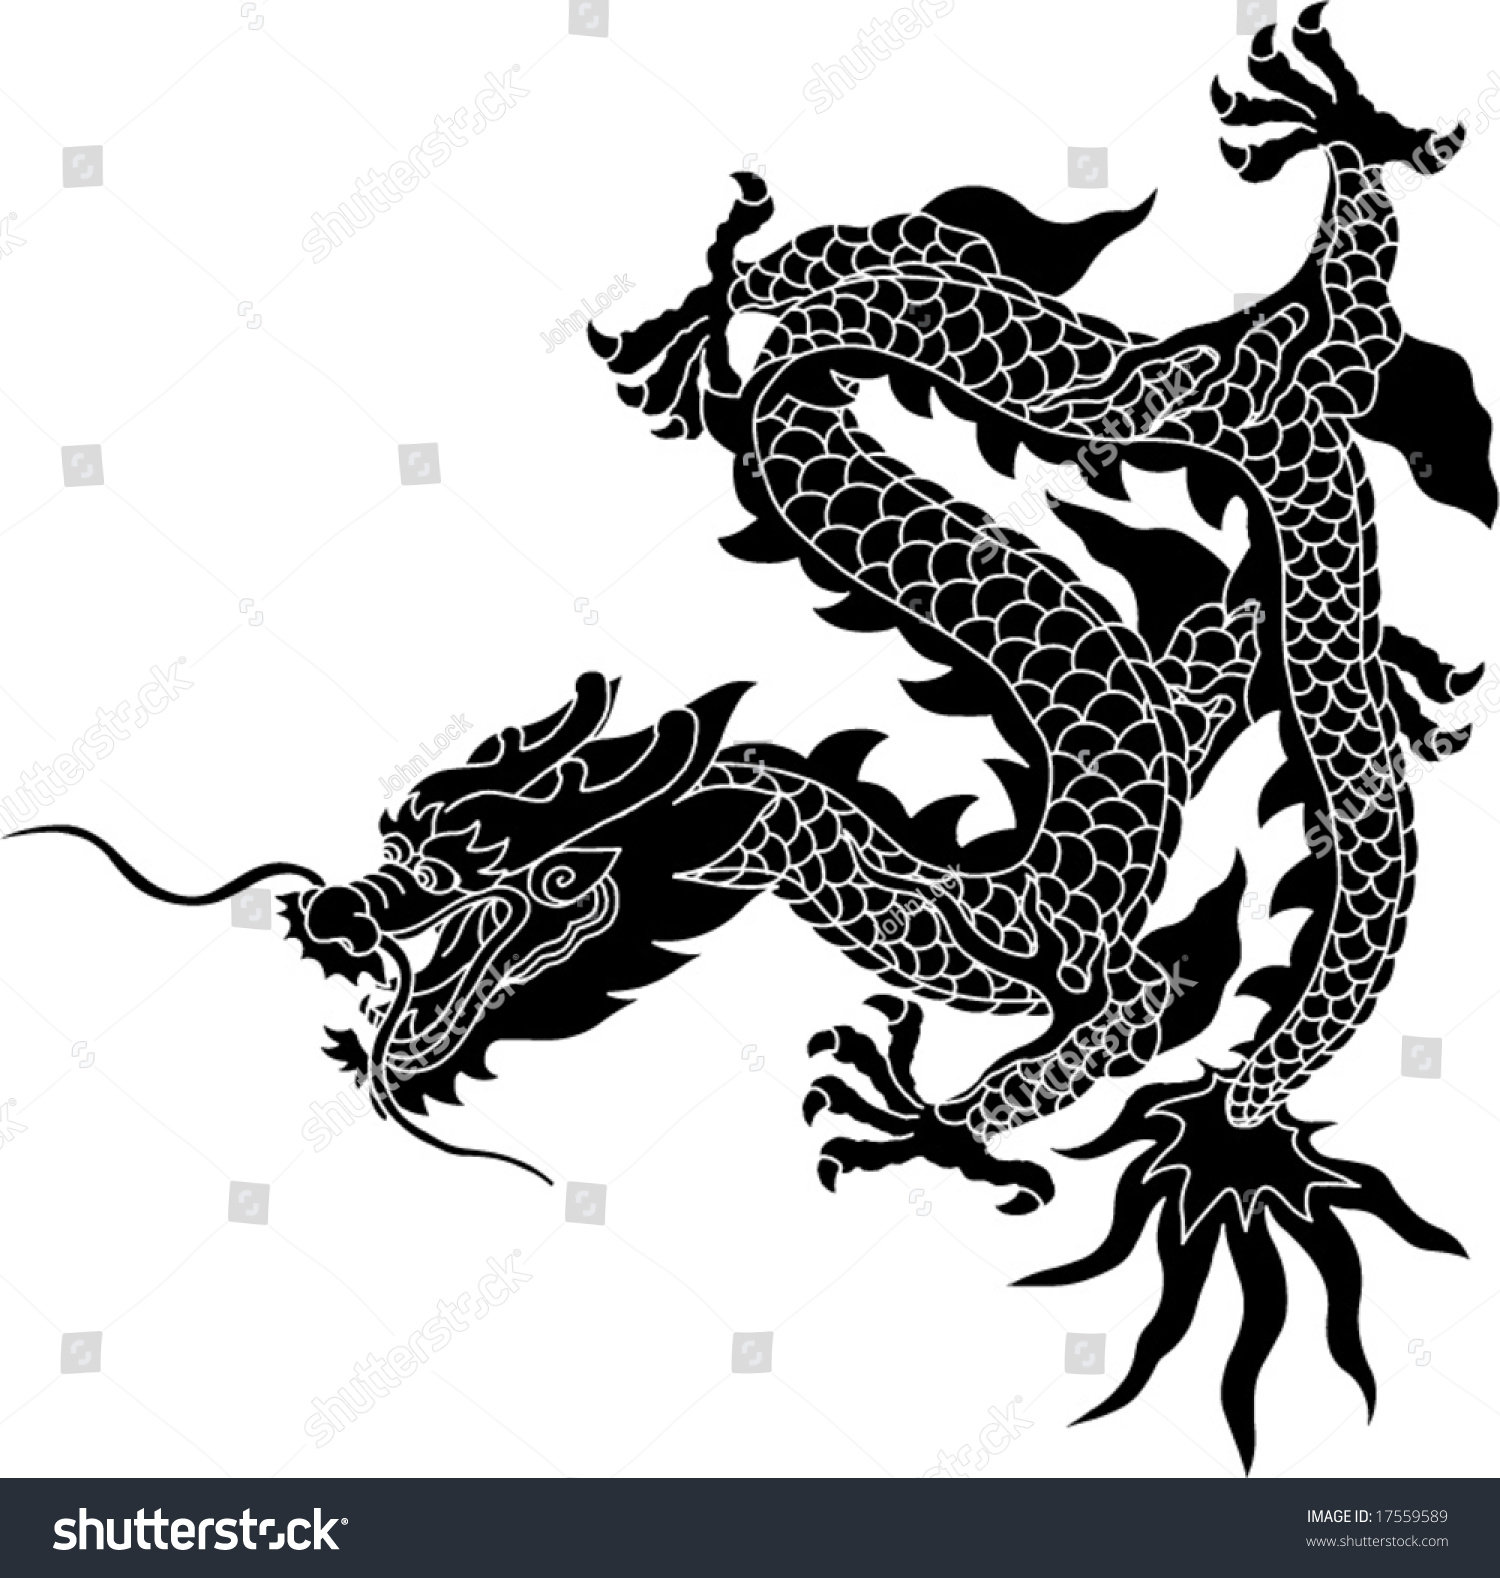 Vector Of Ancient Chinese Dragon Pattern - 17559589 : Shutterstock